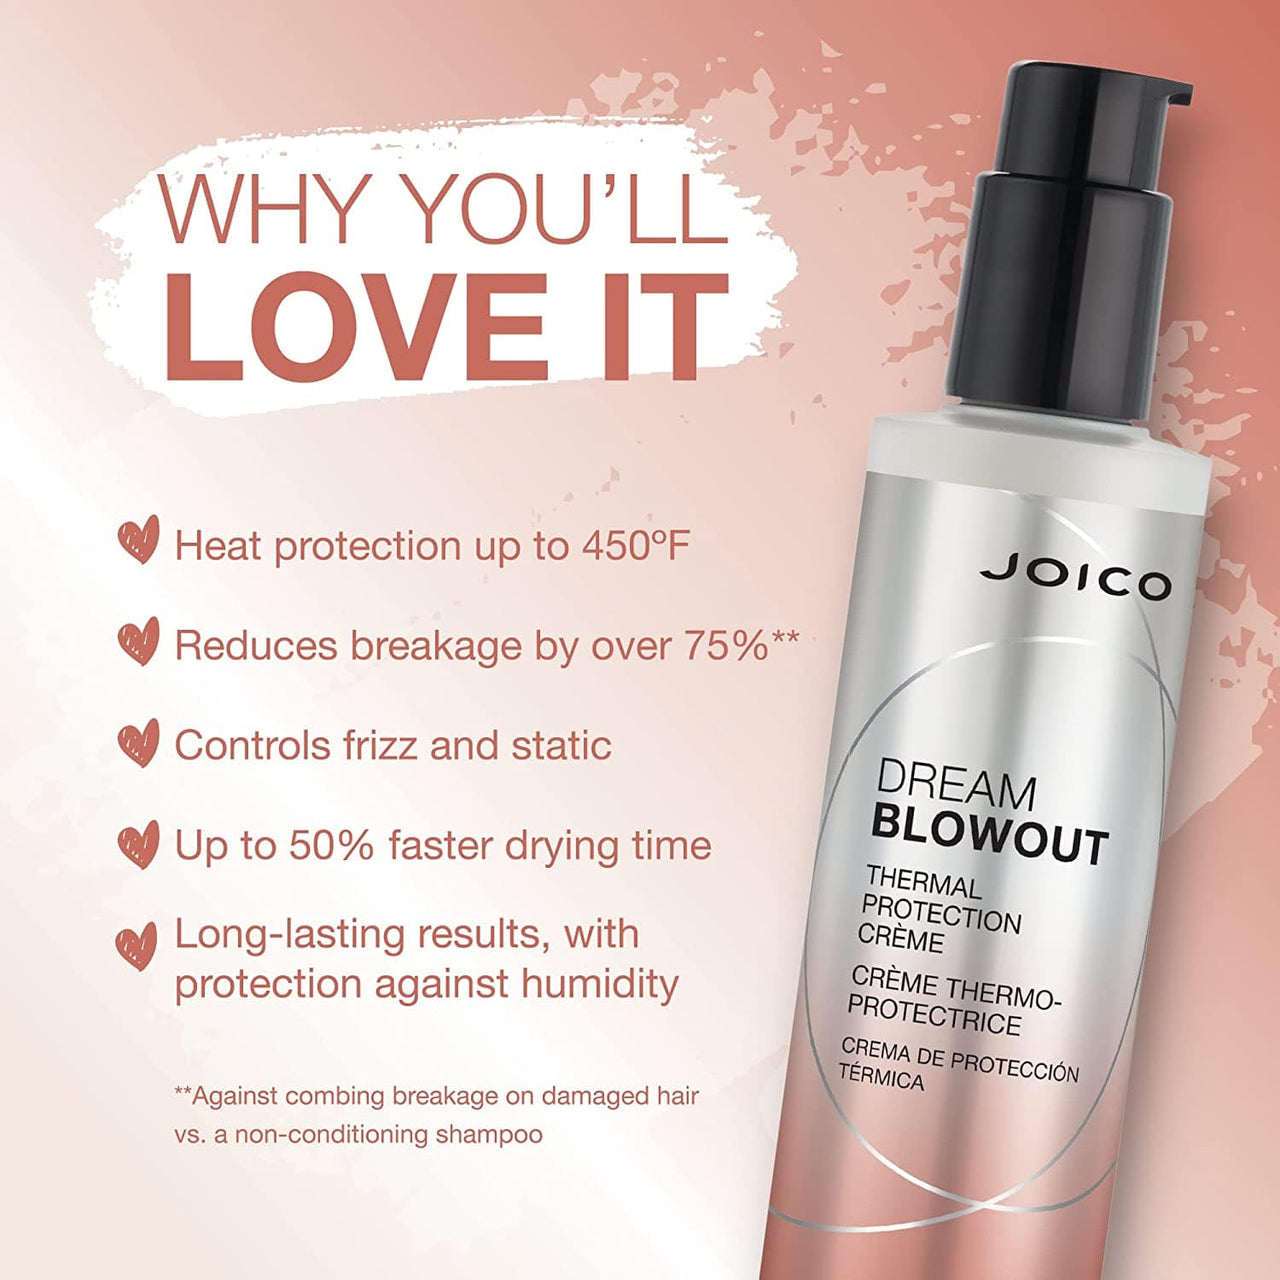 JOICO_Dream Blowout Thermal Protection Creme 200ml_Cosmetic World